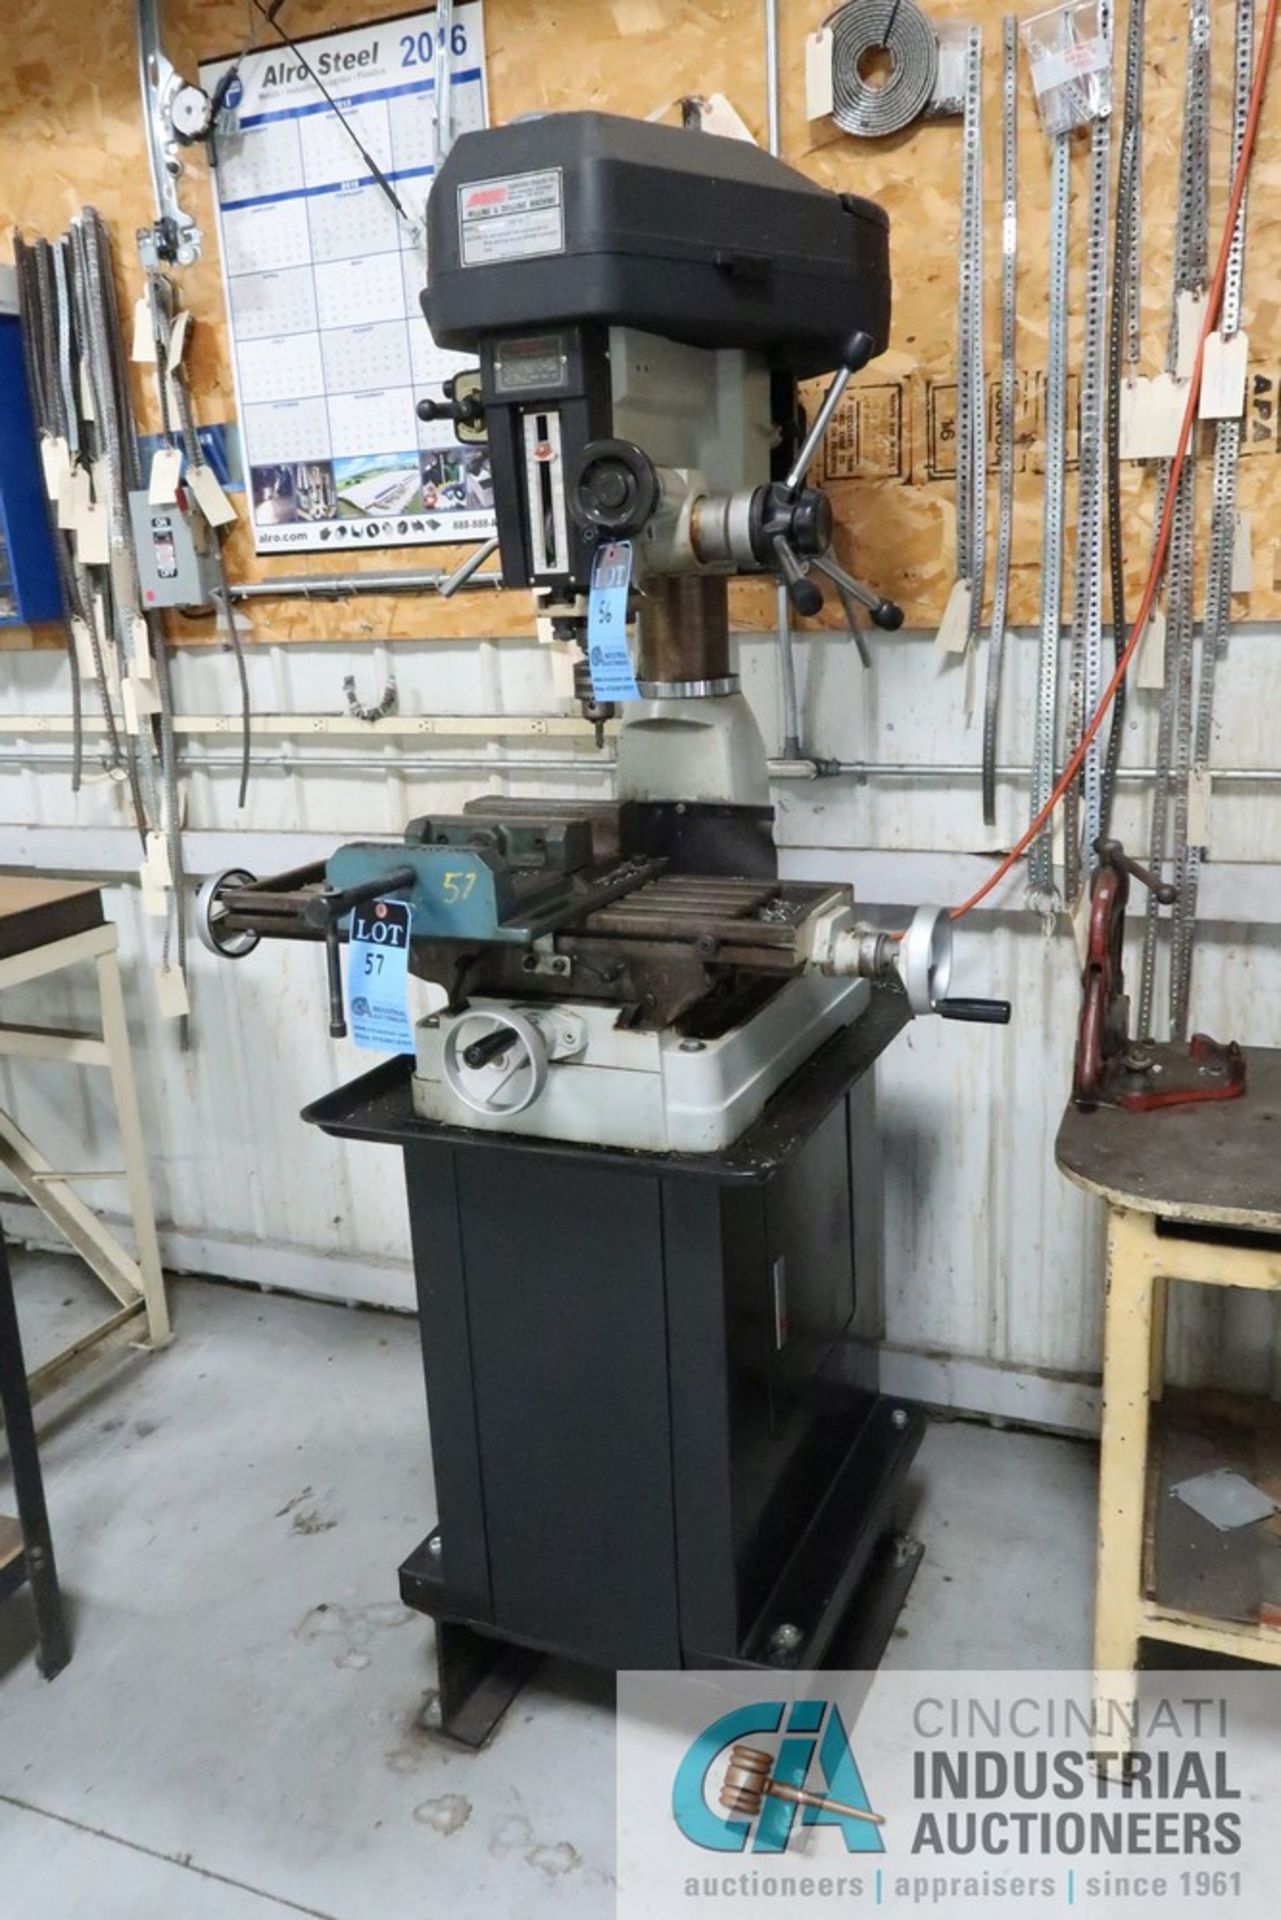 16" MSC MODEL 00685420 VERTICAL MILLING AND DRILLING MACHINE; S/N 035525, 8" X 29" TABLE